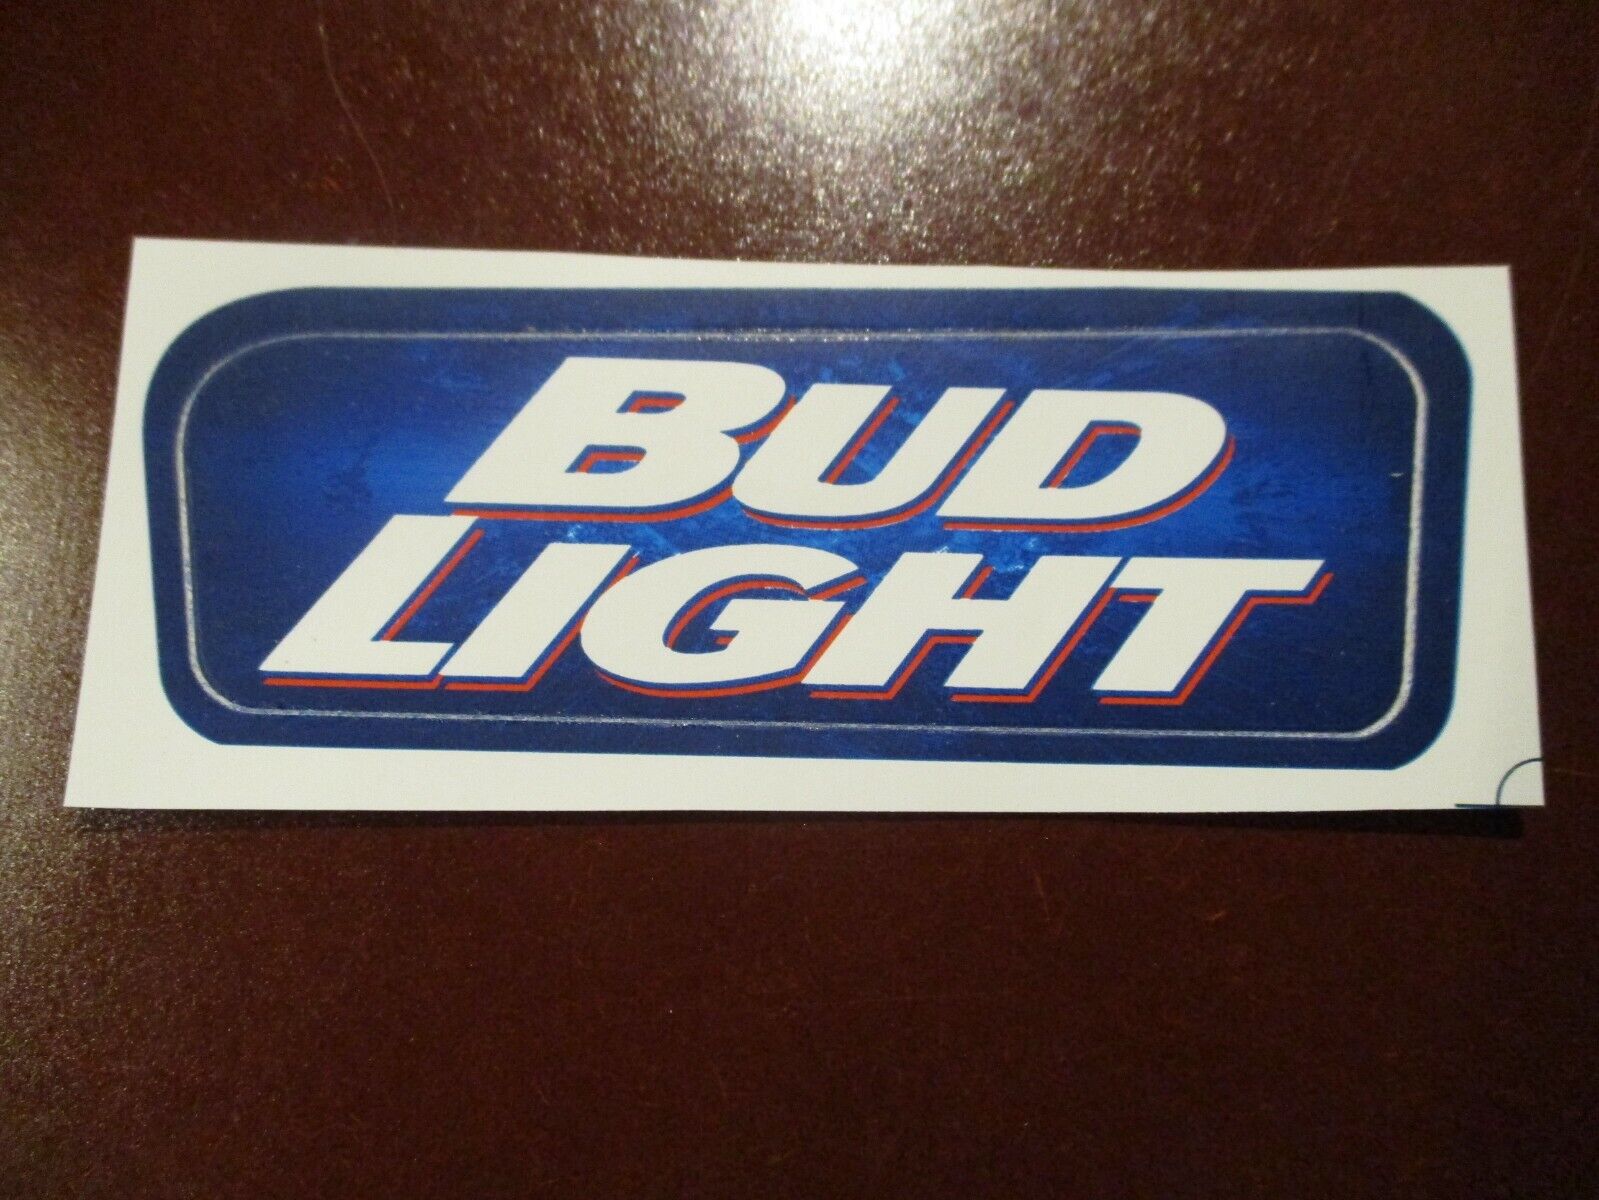 BUDWEISER Bud Light iconic font logo STICKER decal craft beer brewing brewery